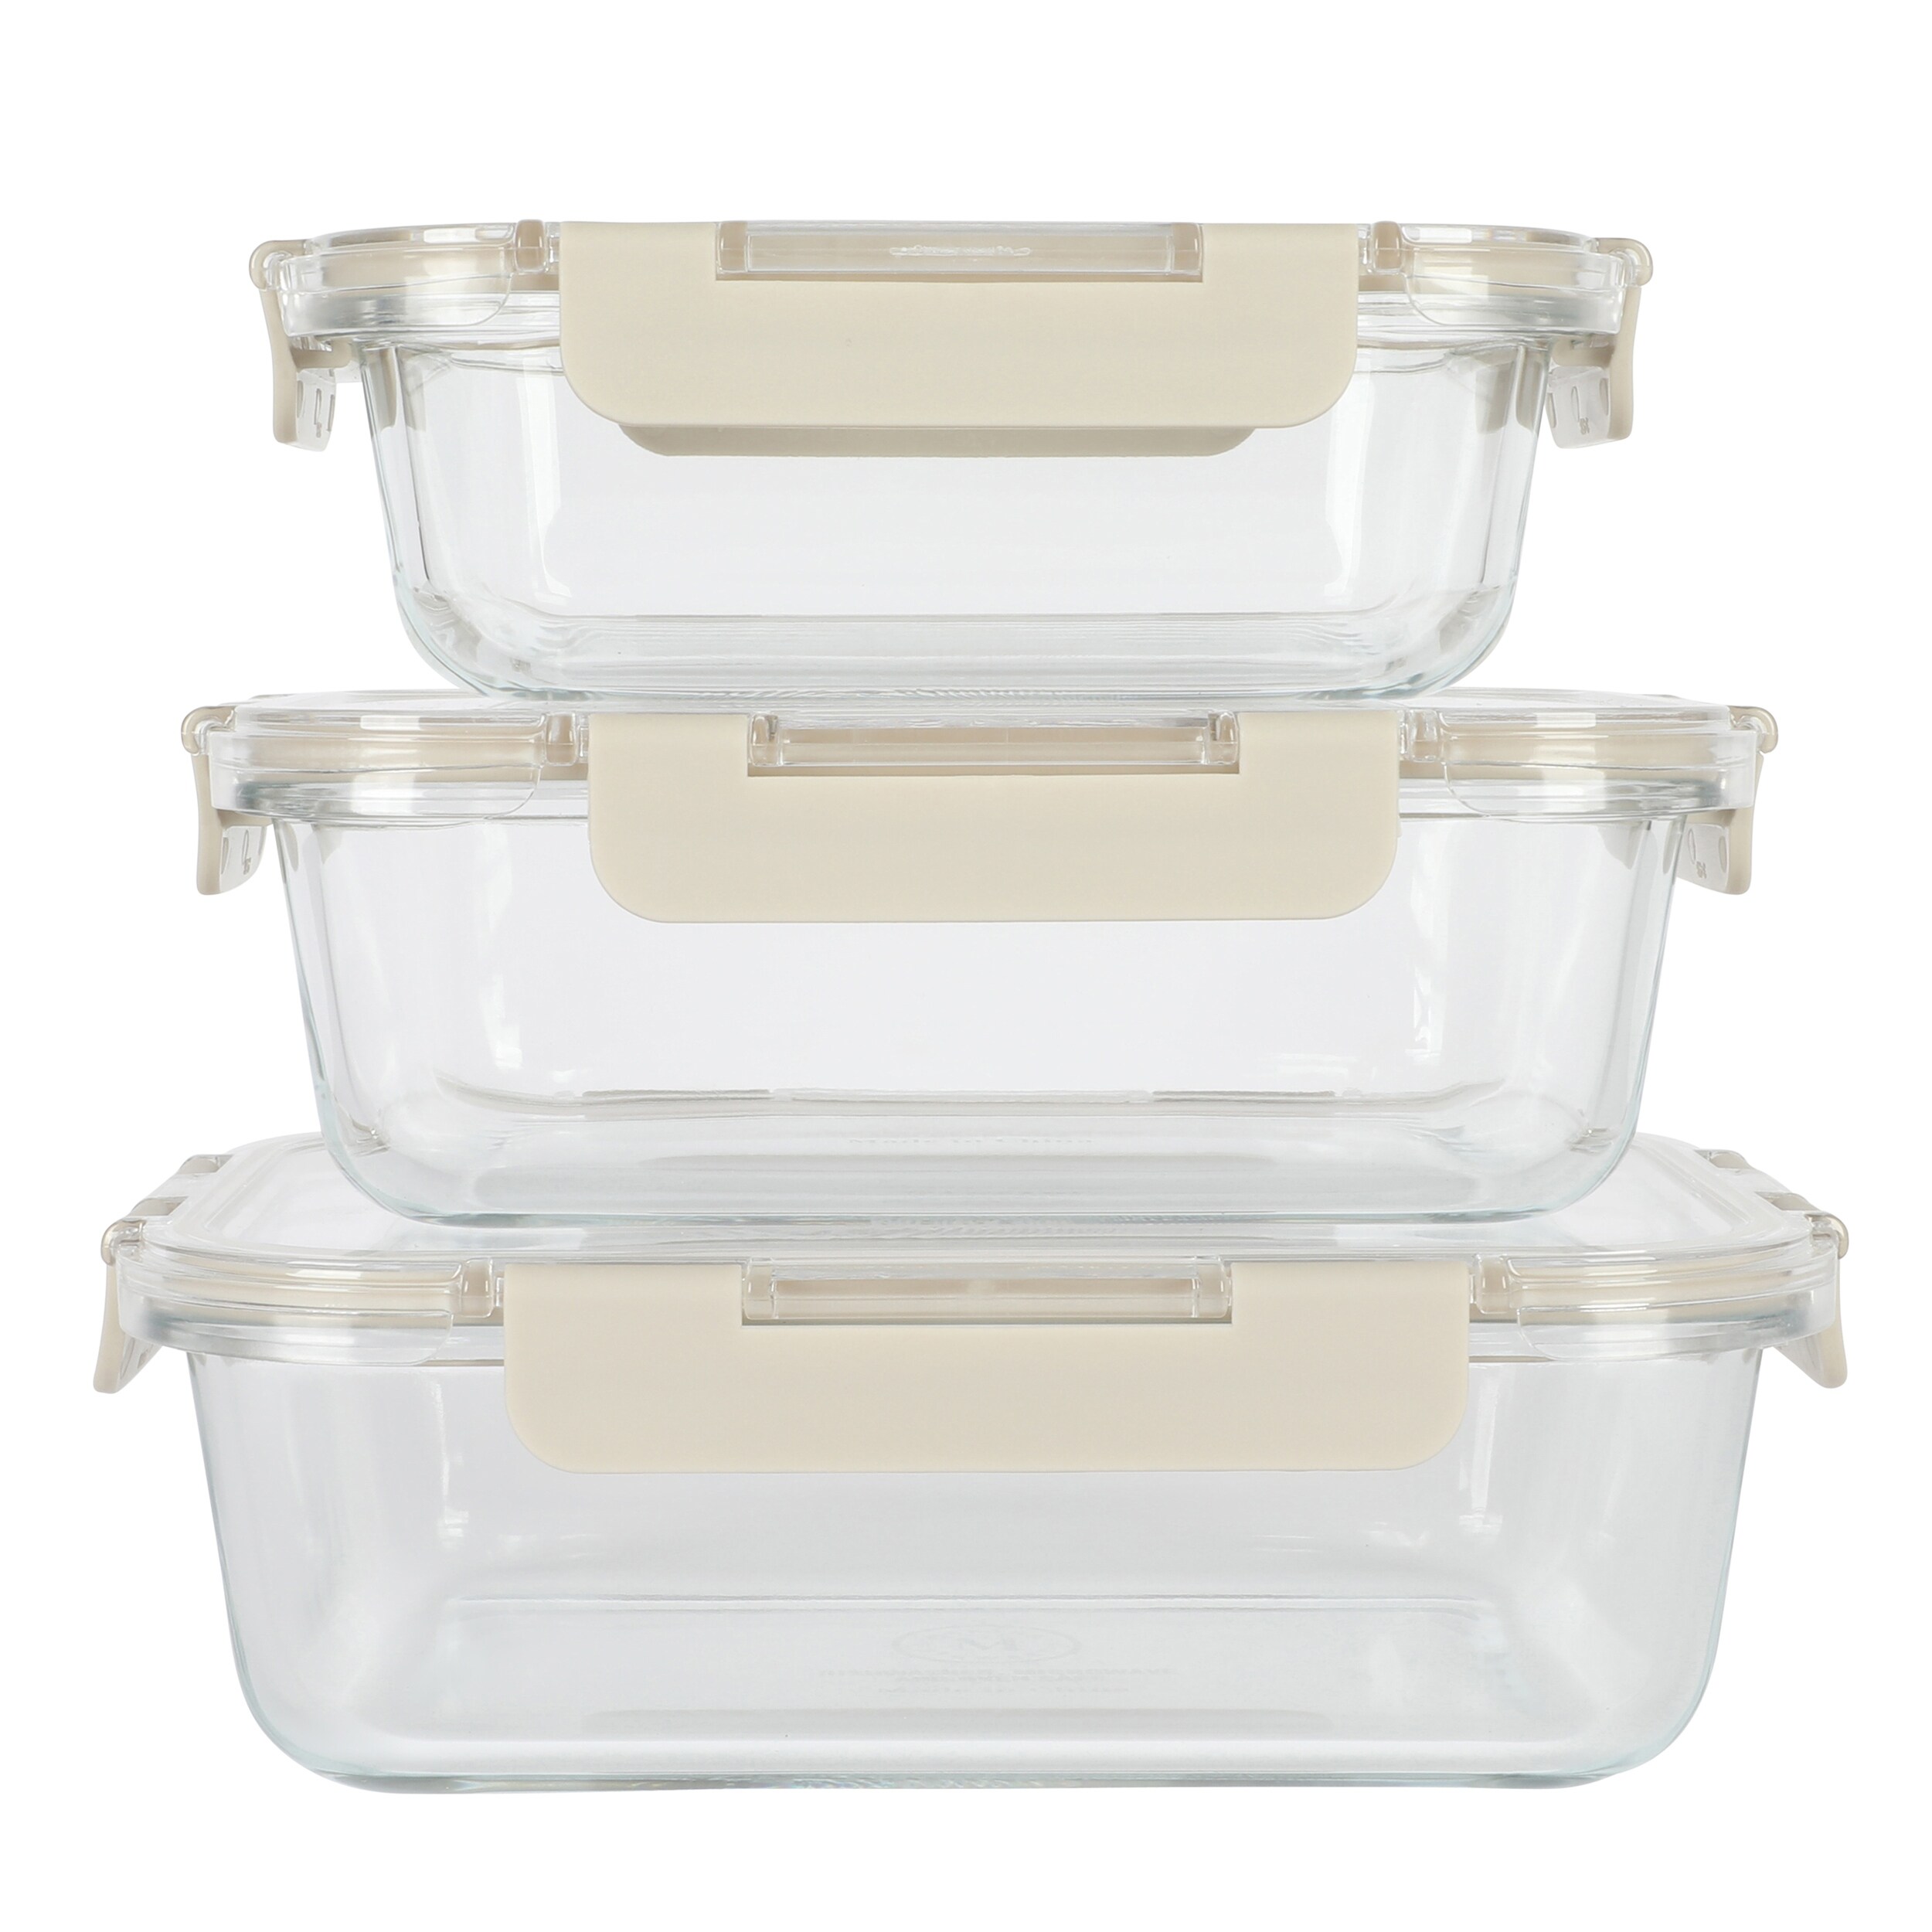 https://ak1.ostkcdn.com/images/products/is/images/direct/df732ff8b76cb6d7878797918c20862b34f7eff8/6-Piece-Assorted-Glass-Container-Set-in-Grey-with-Locking-Lids.jpg